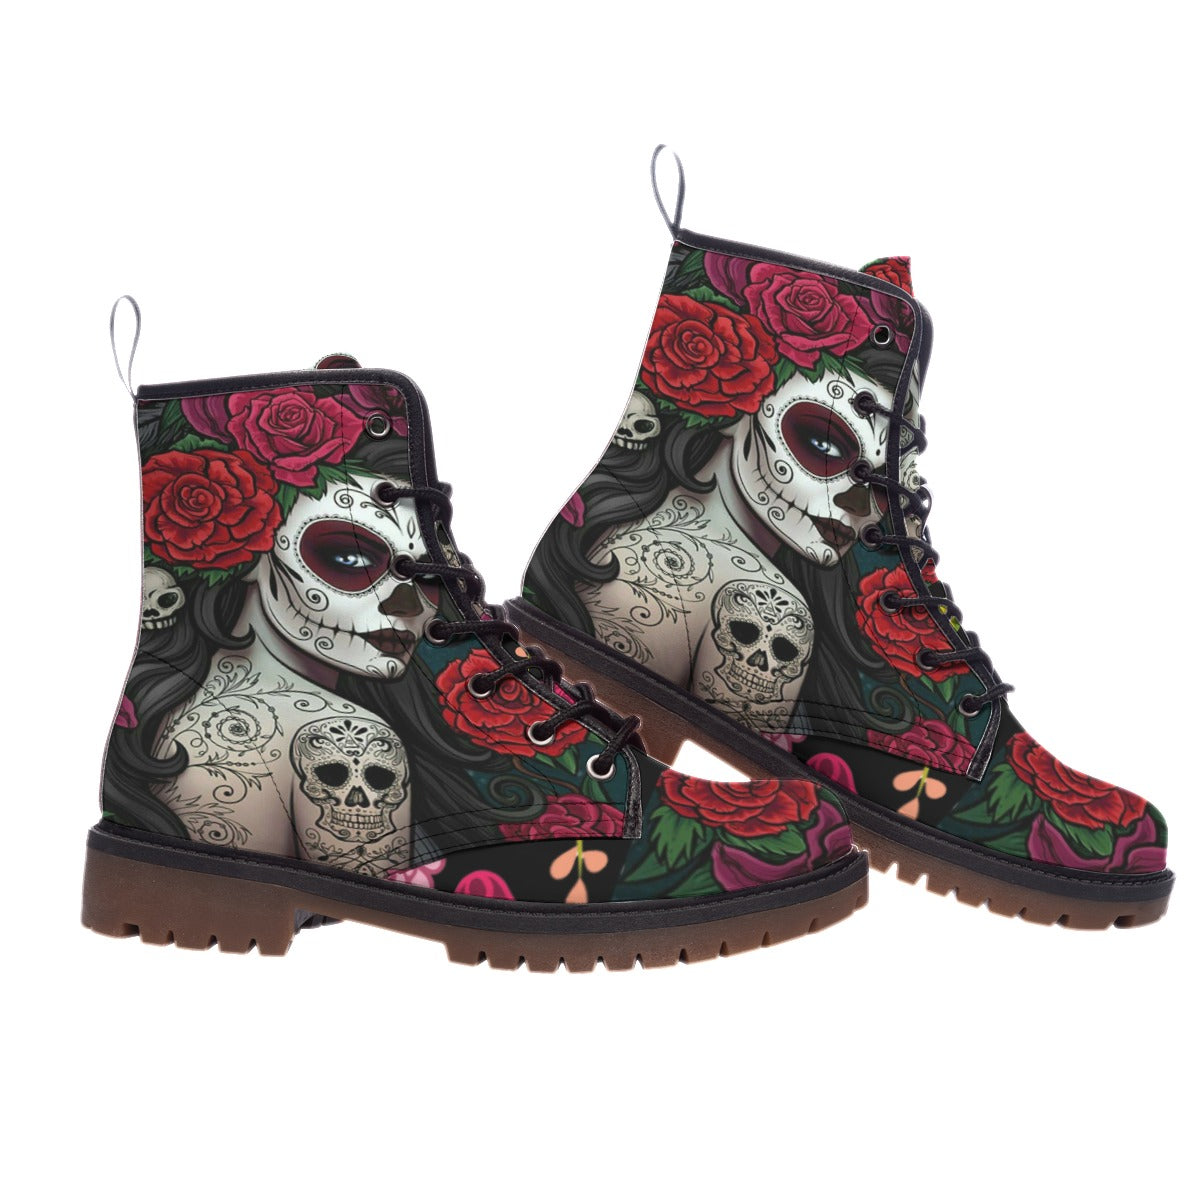 Sugar skull floral girl Women's Martin Short Boots, Day of the dead women's boots